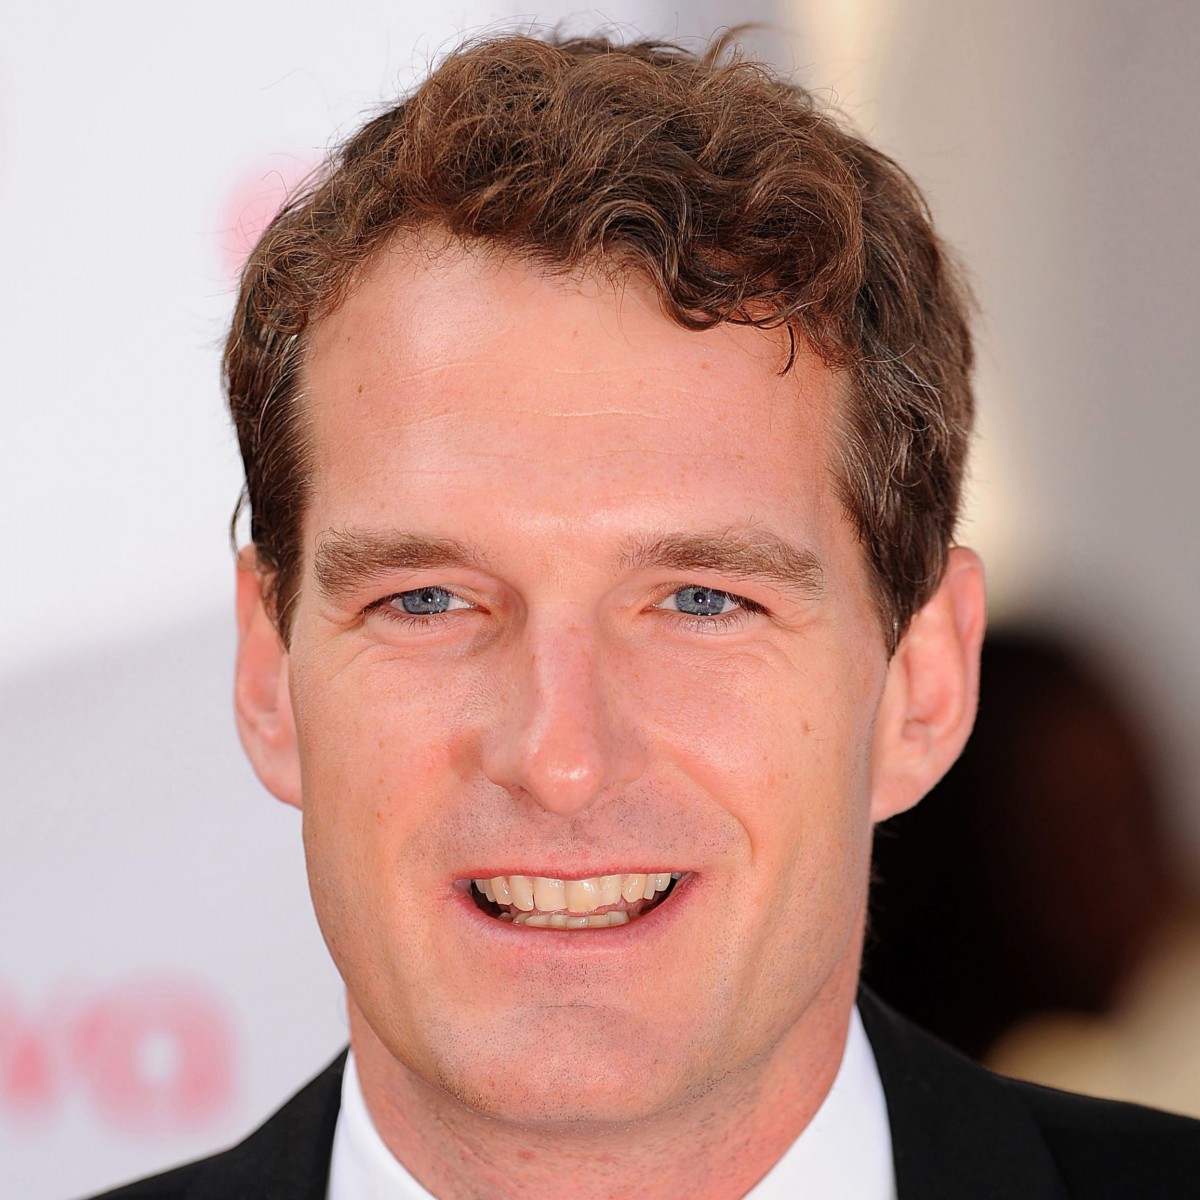 Dan Snow also signed the letter, which was published in The Guardian